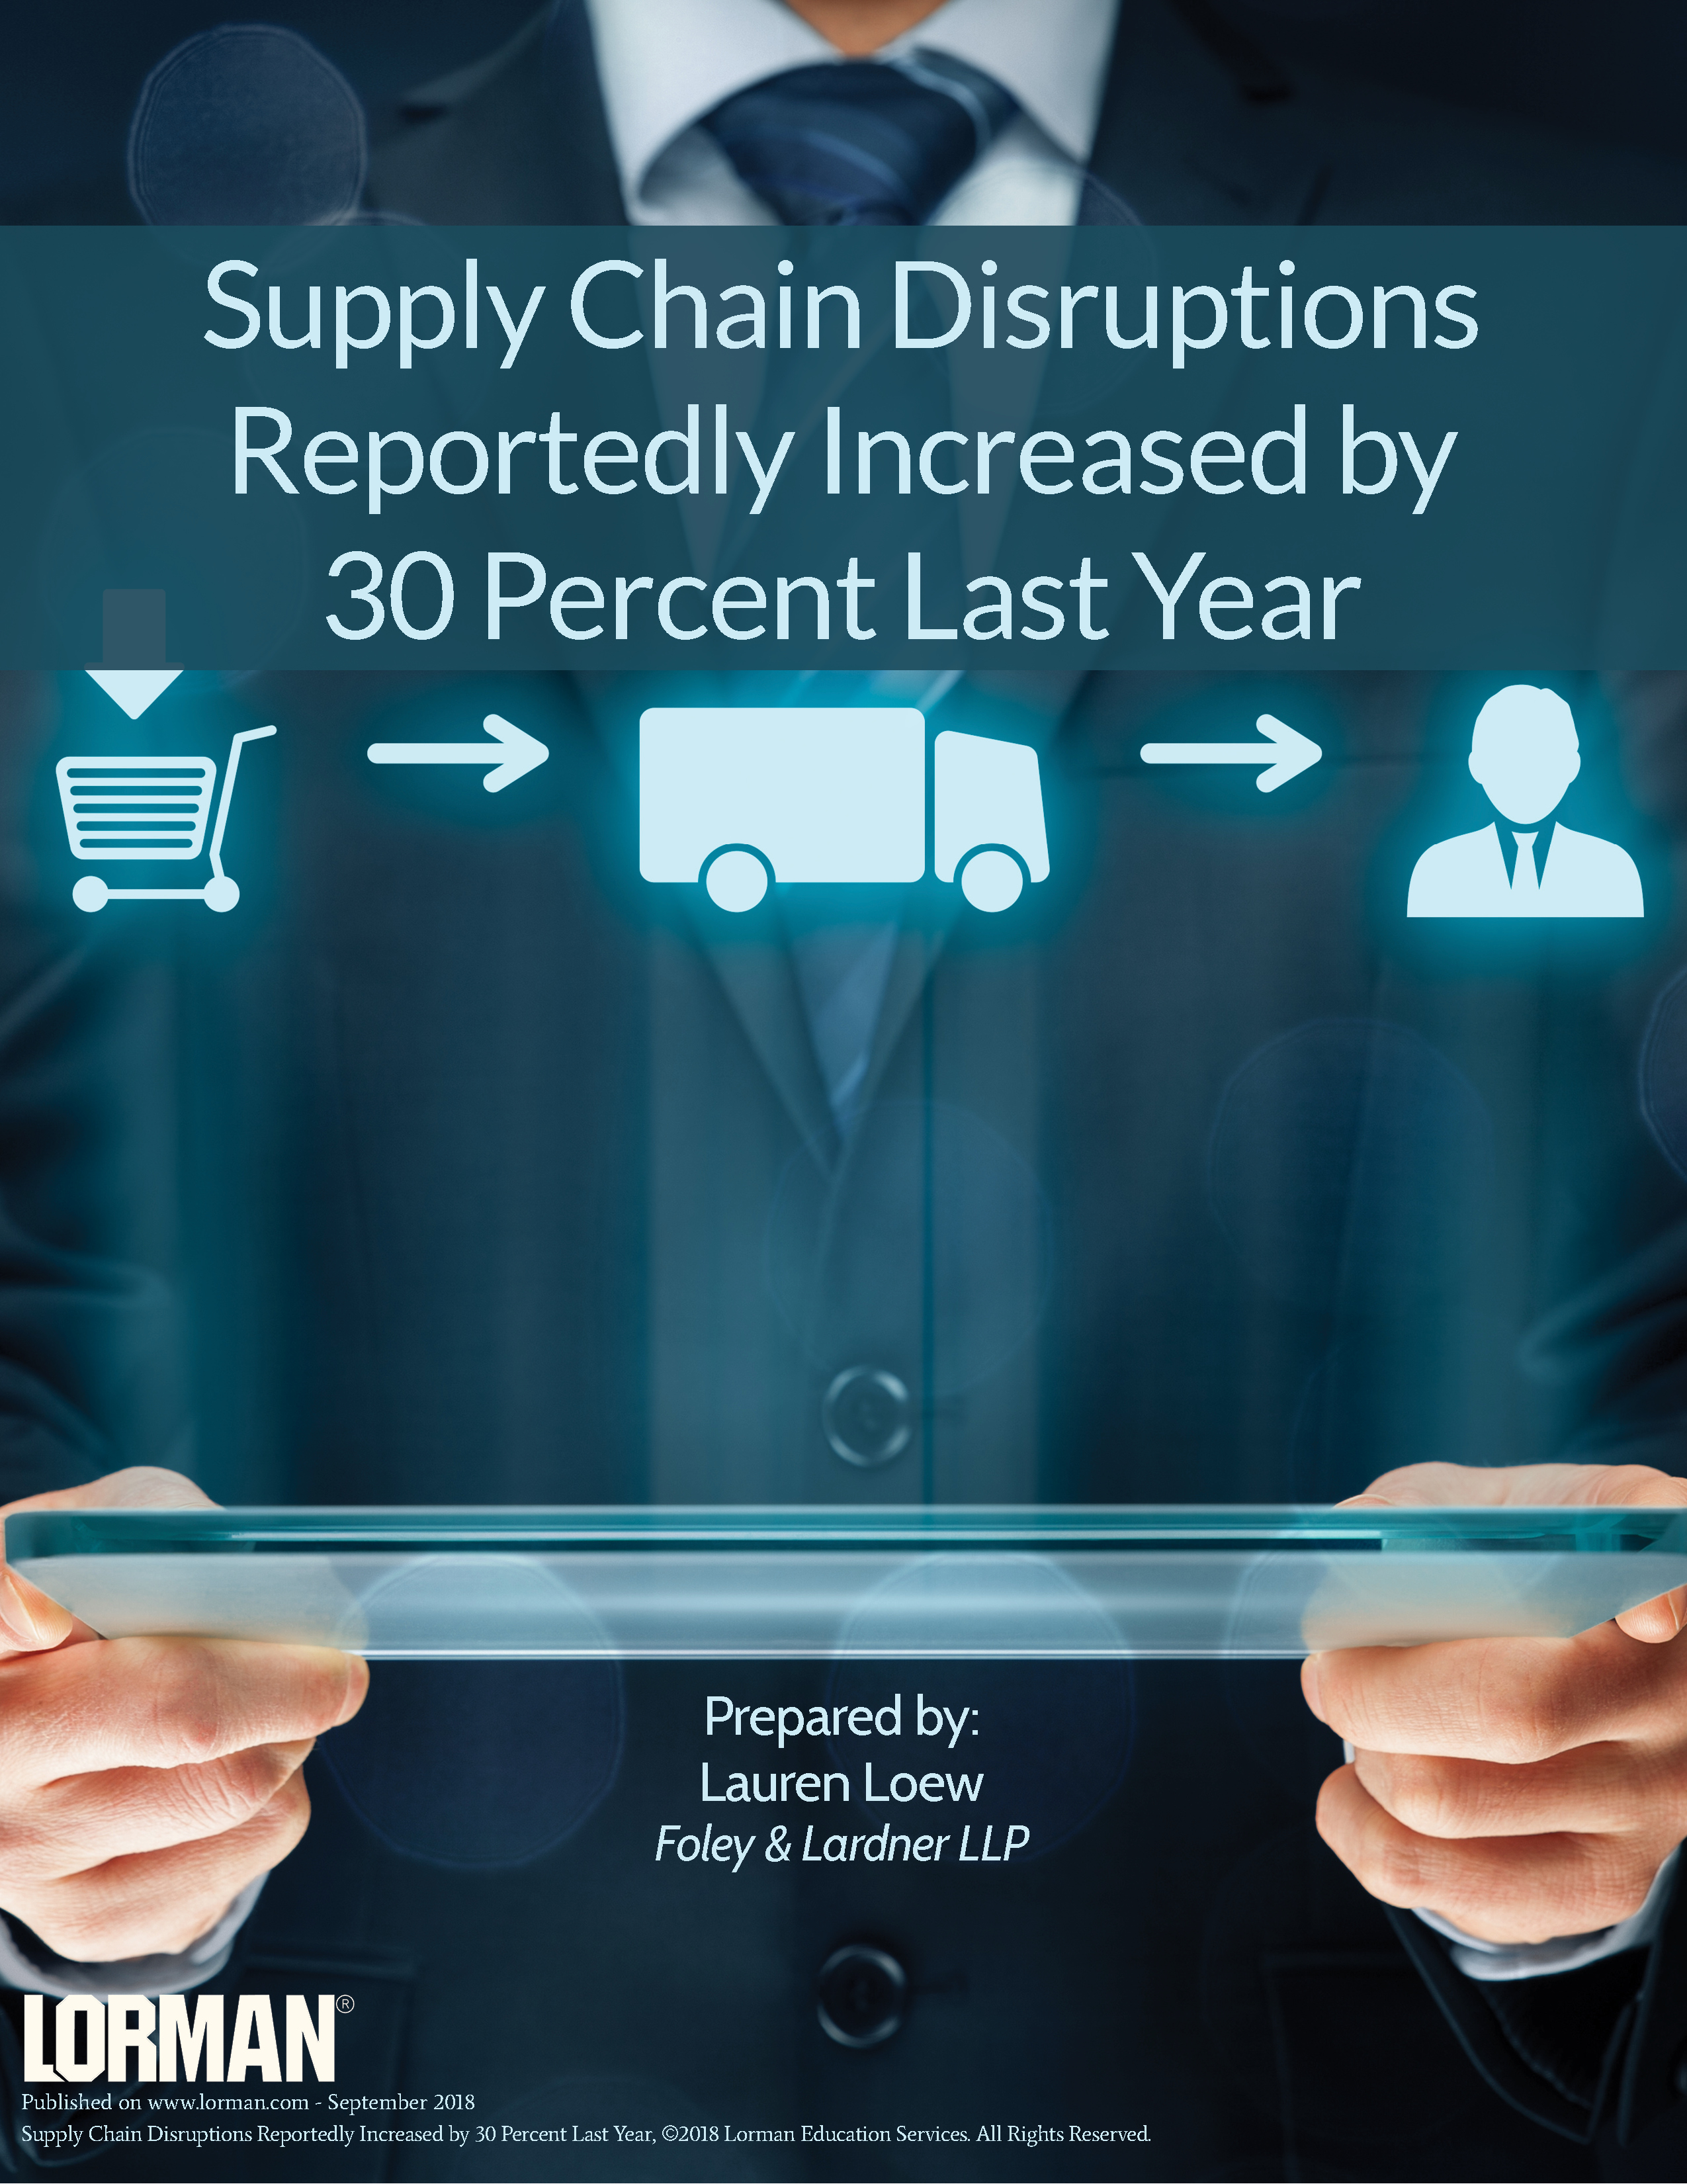 Supply Chain Disruptions Reportedly Increased by 30 Percent Last Year